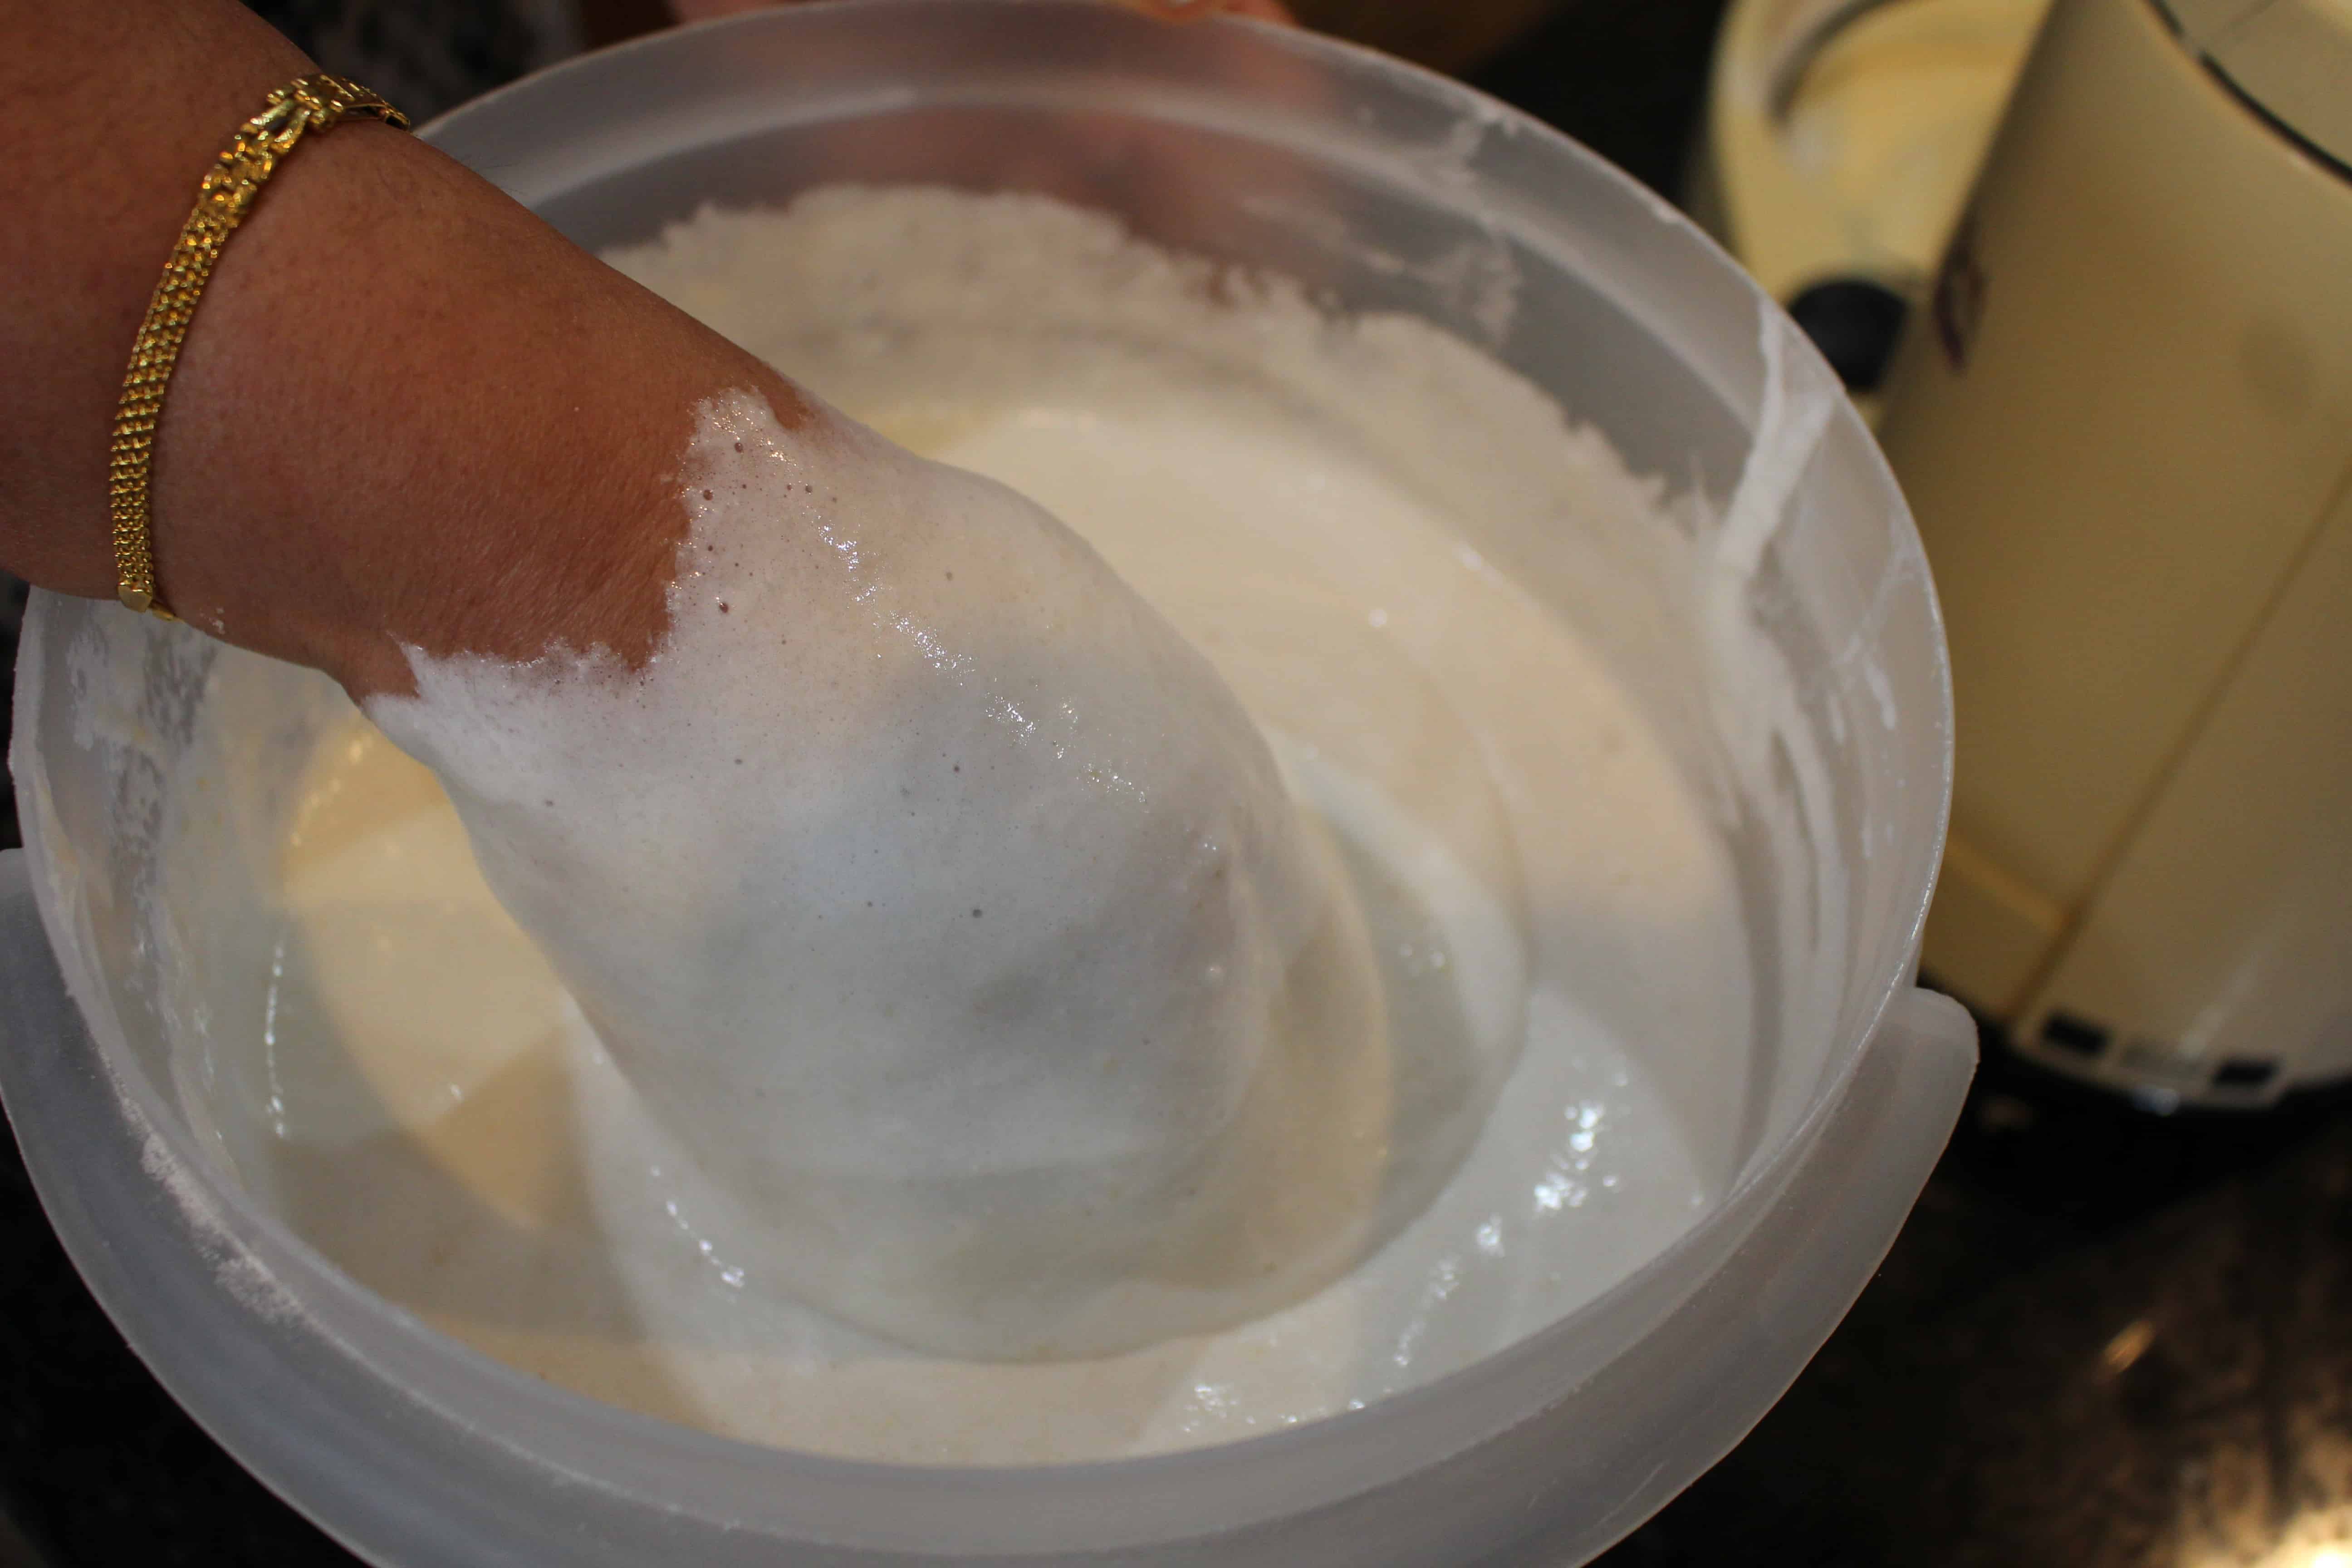 Mixing the batter with hands.